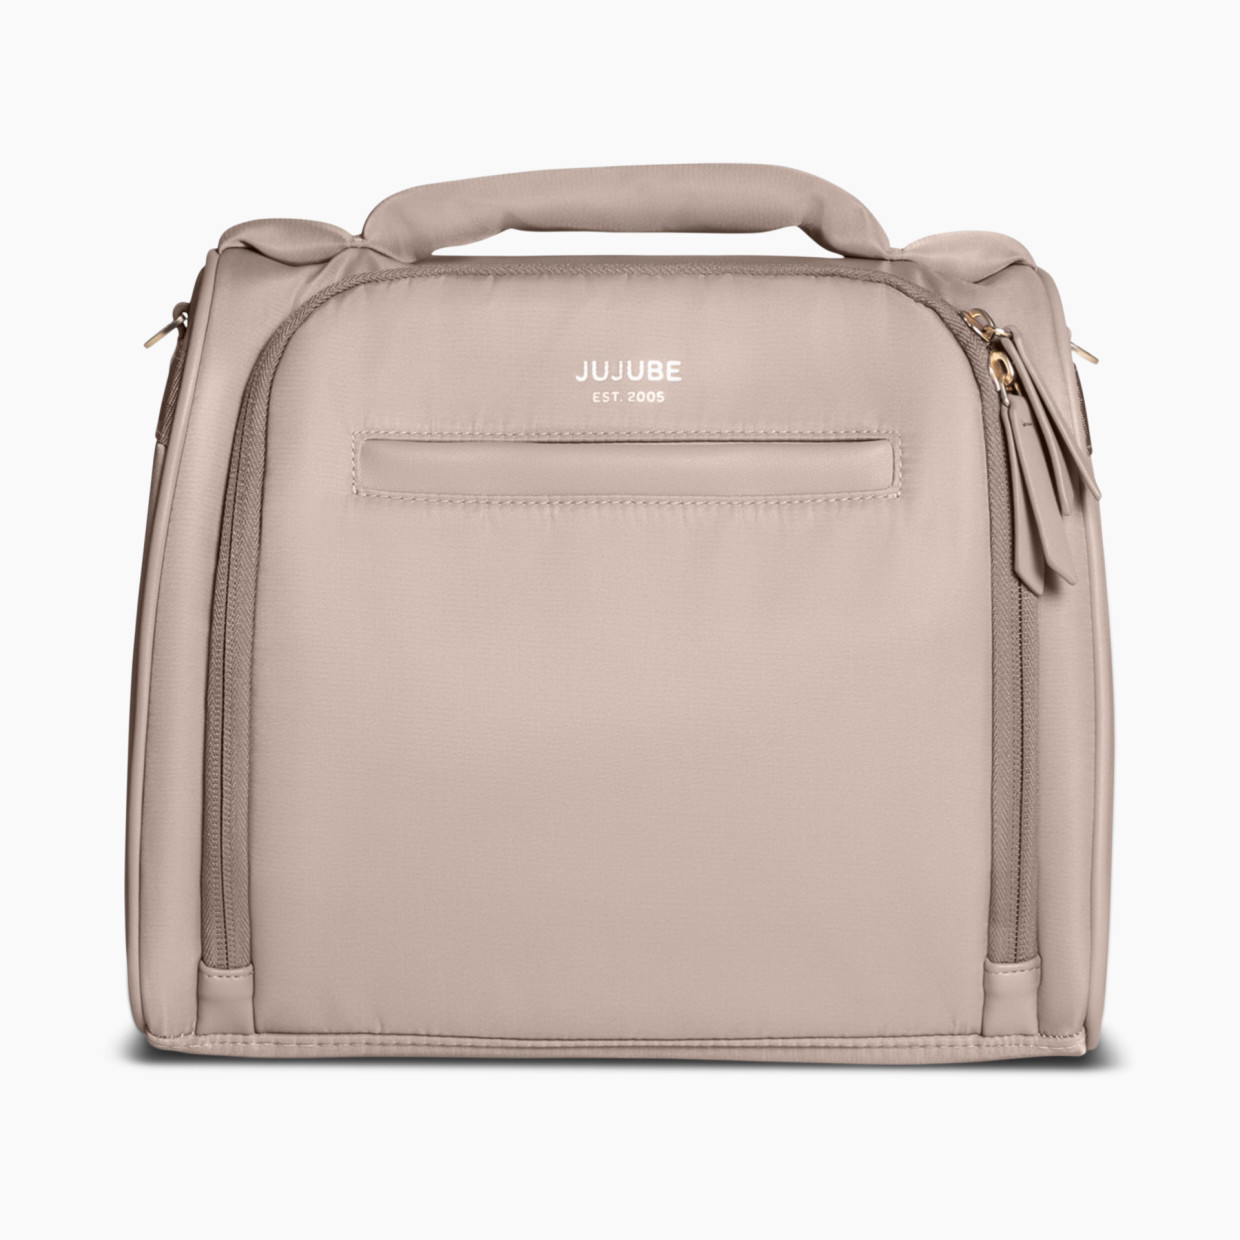 JUJUBE The Insulated Bottle Bag - Taupe.